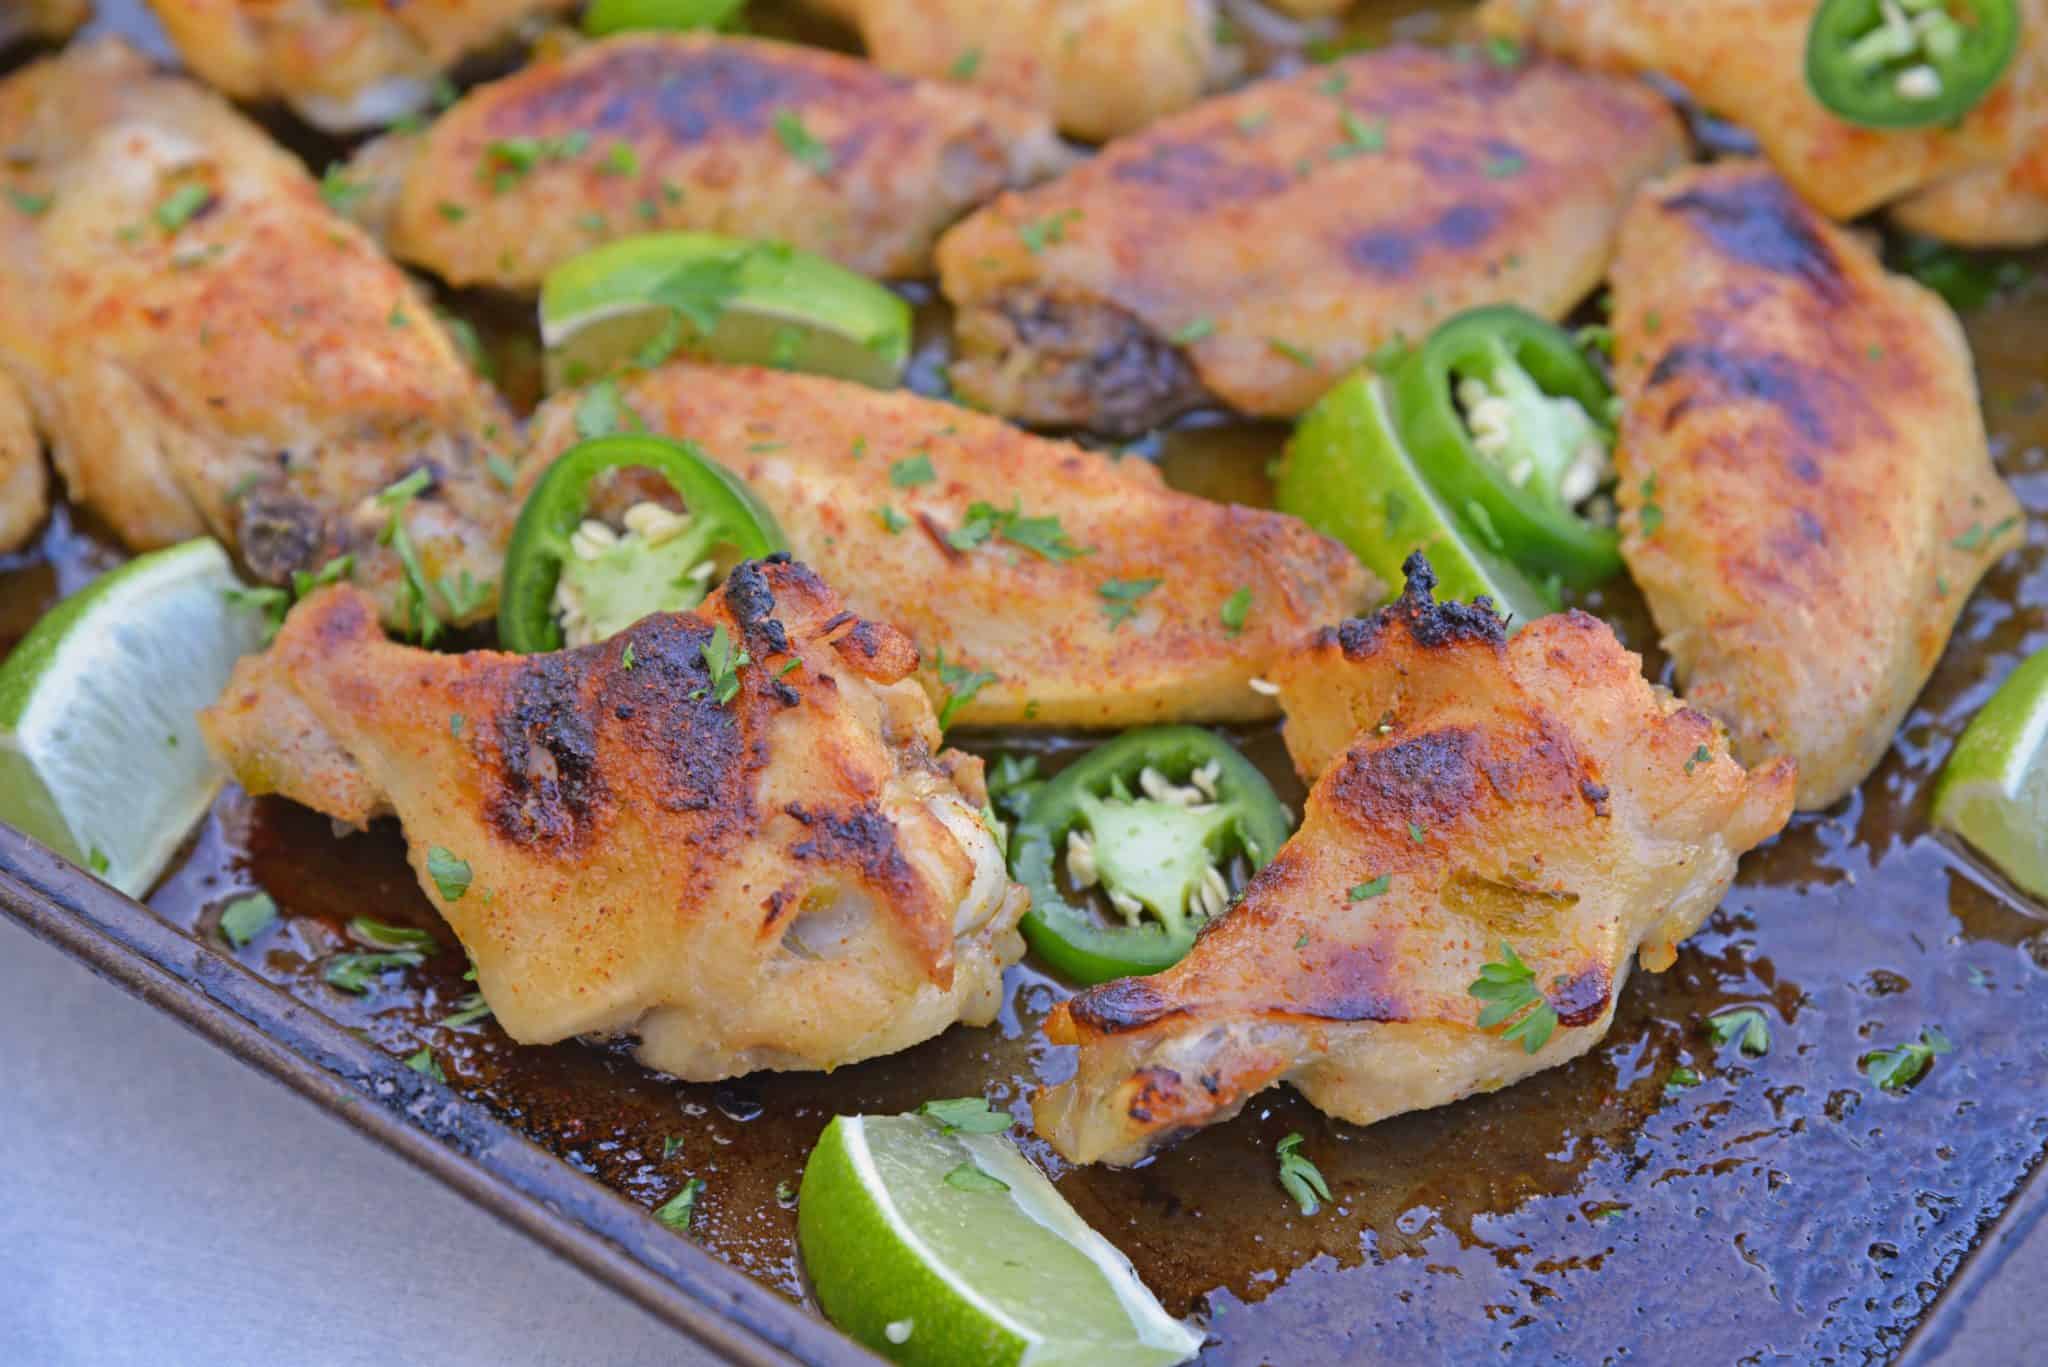 Sweet and spicy Jalapeno Lime Wings are baked wings perfect for holiday parties or watching the big game. A unique flavor everyone will love. #bakedchickenwings #chickenwingrecipes www.savoryexperiments.com